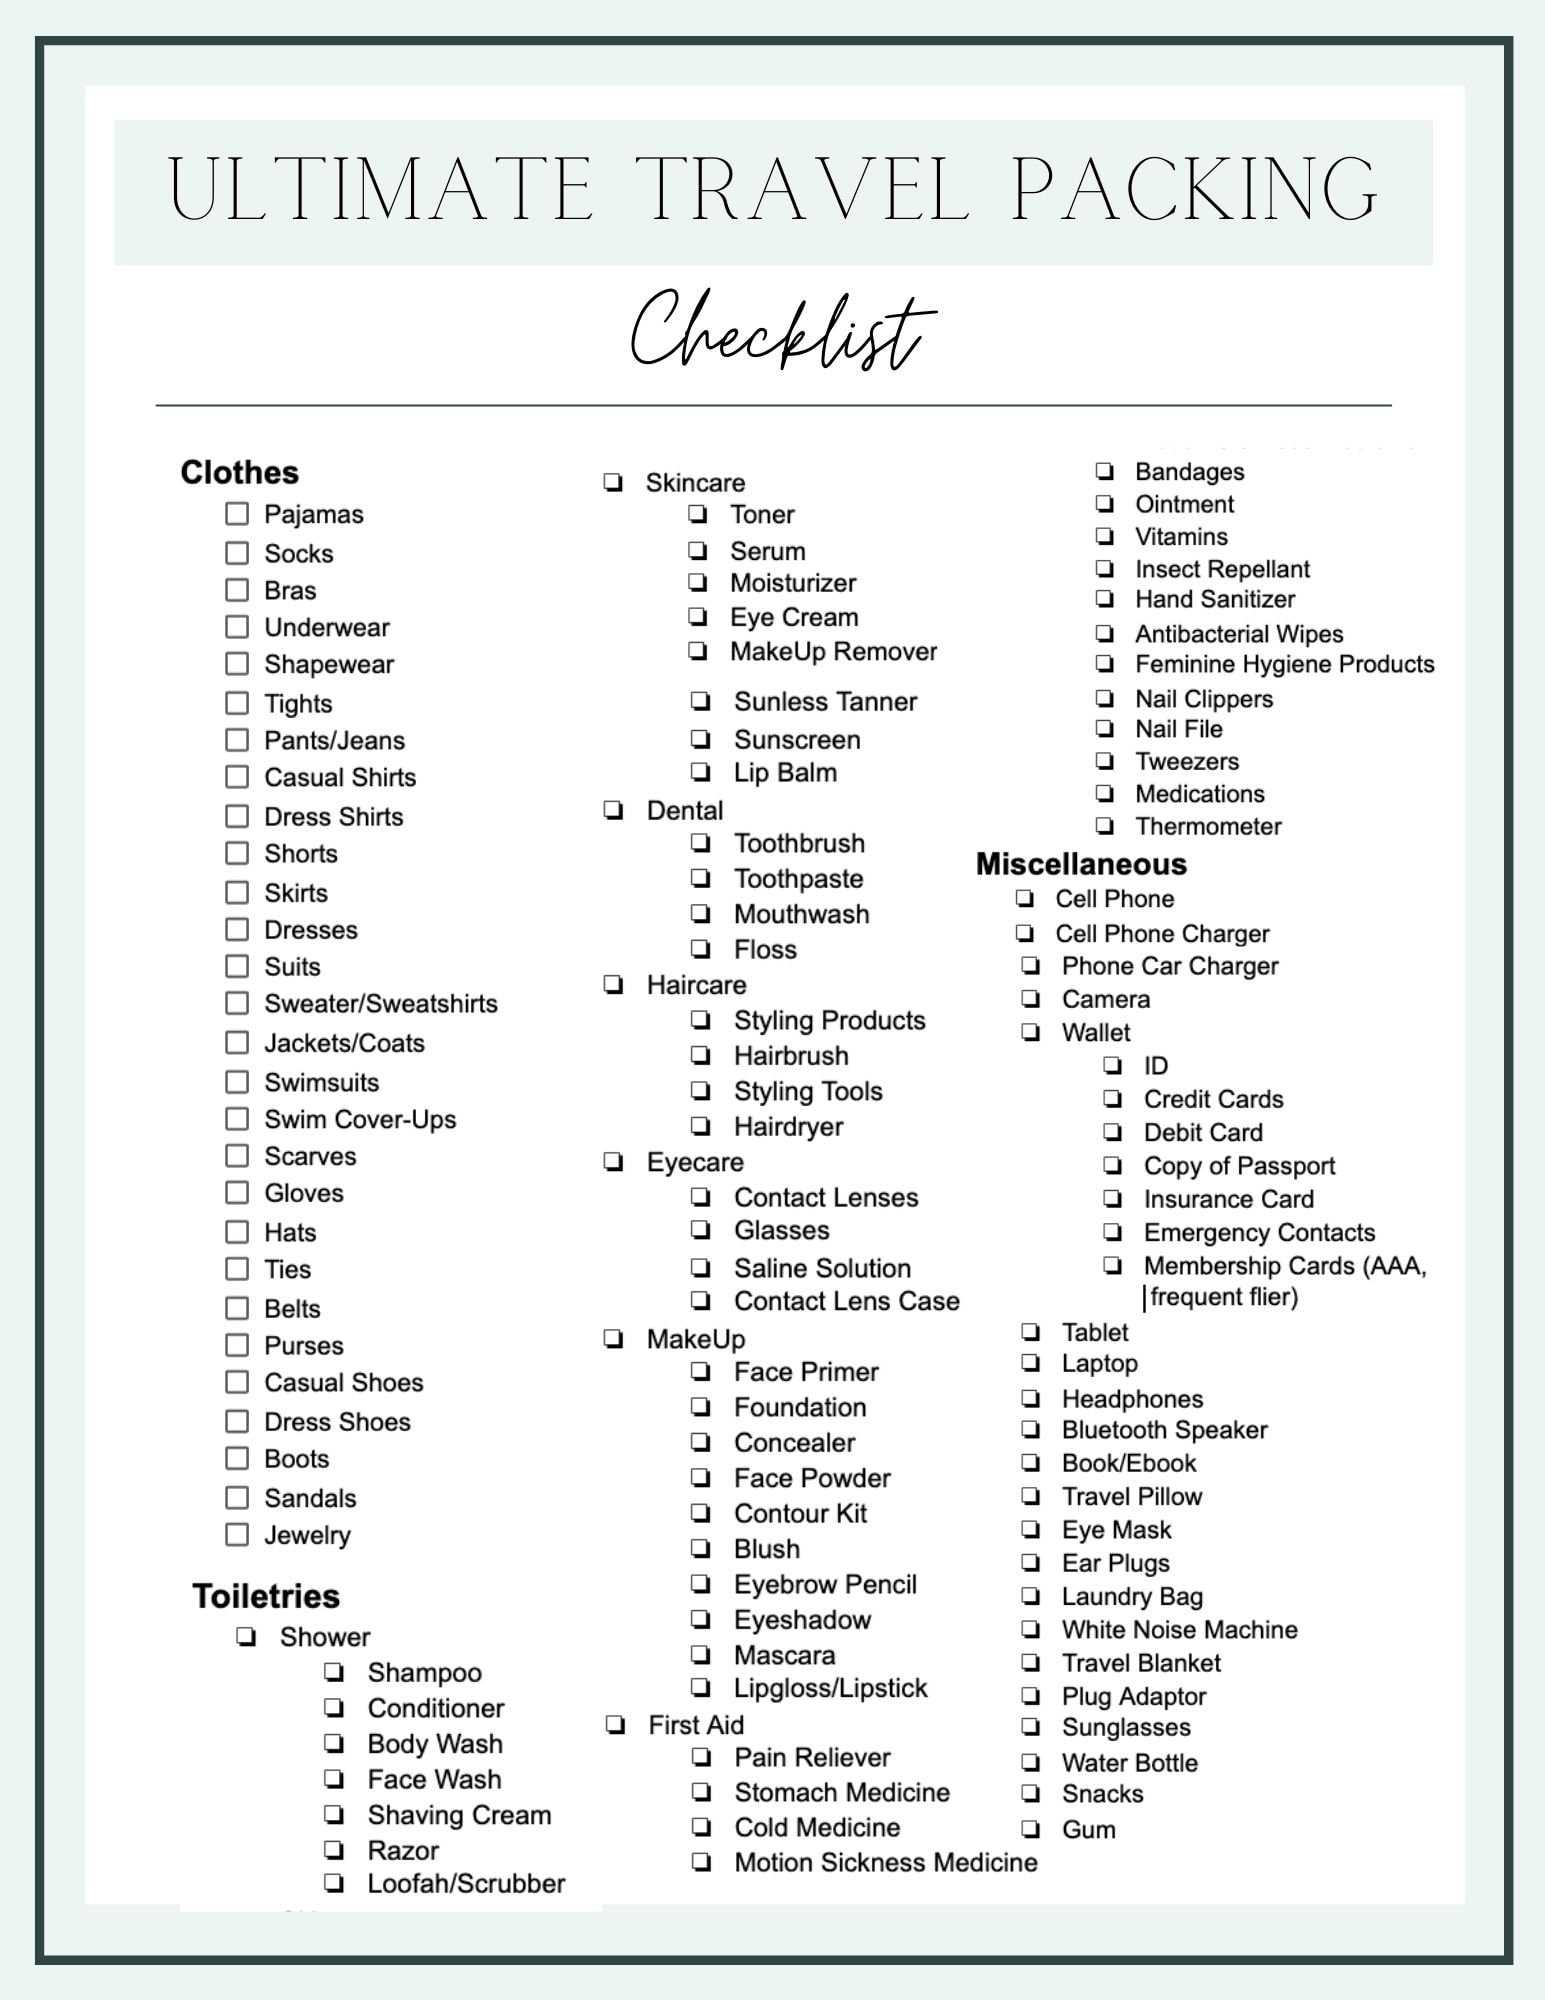 traveling checklist template example